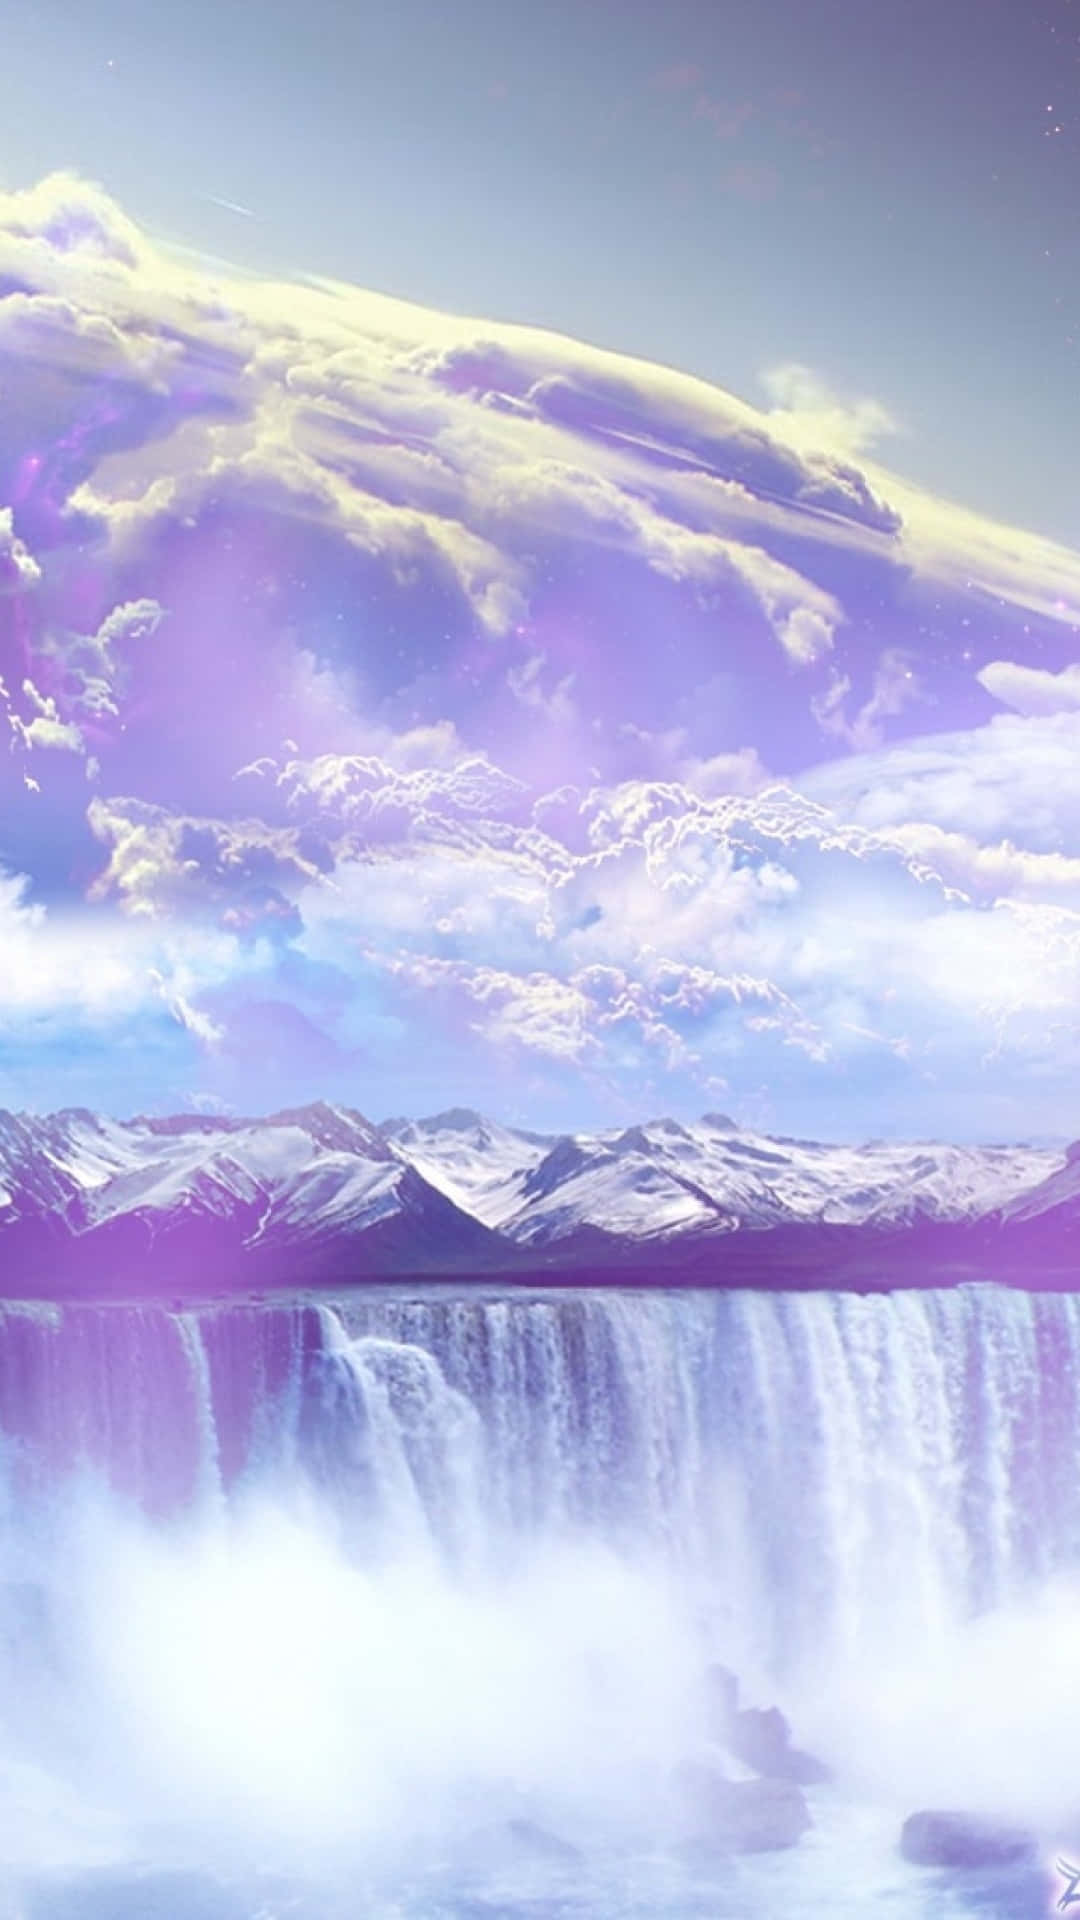 A Purple Waterfall With Clouds And Mountains Background